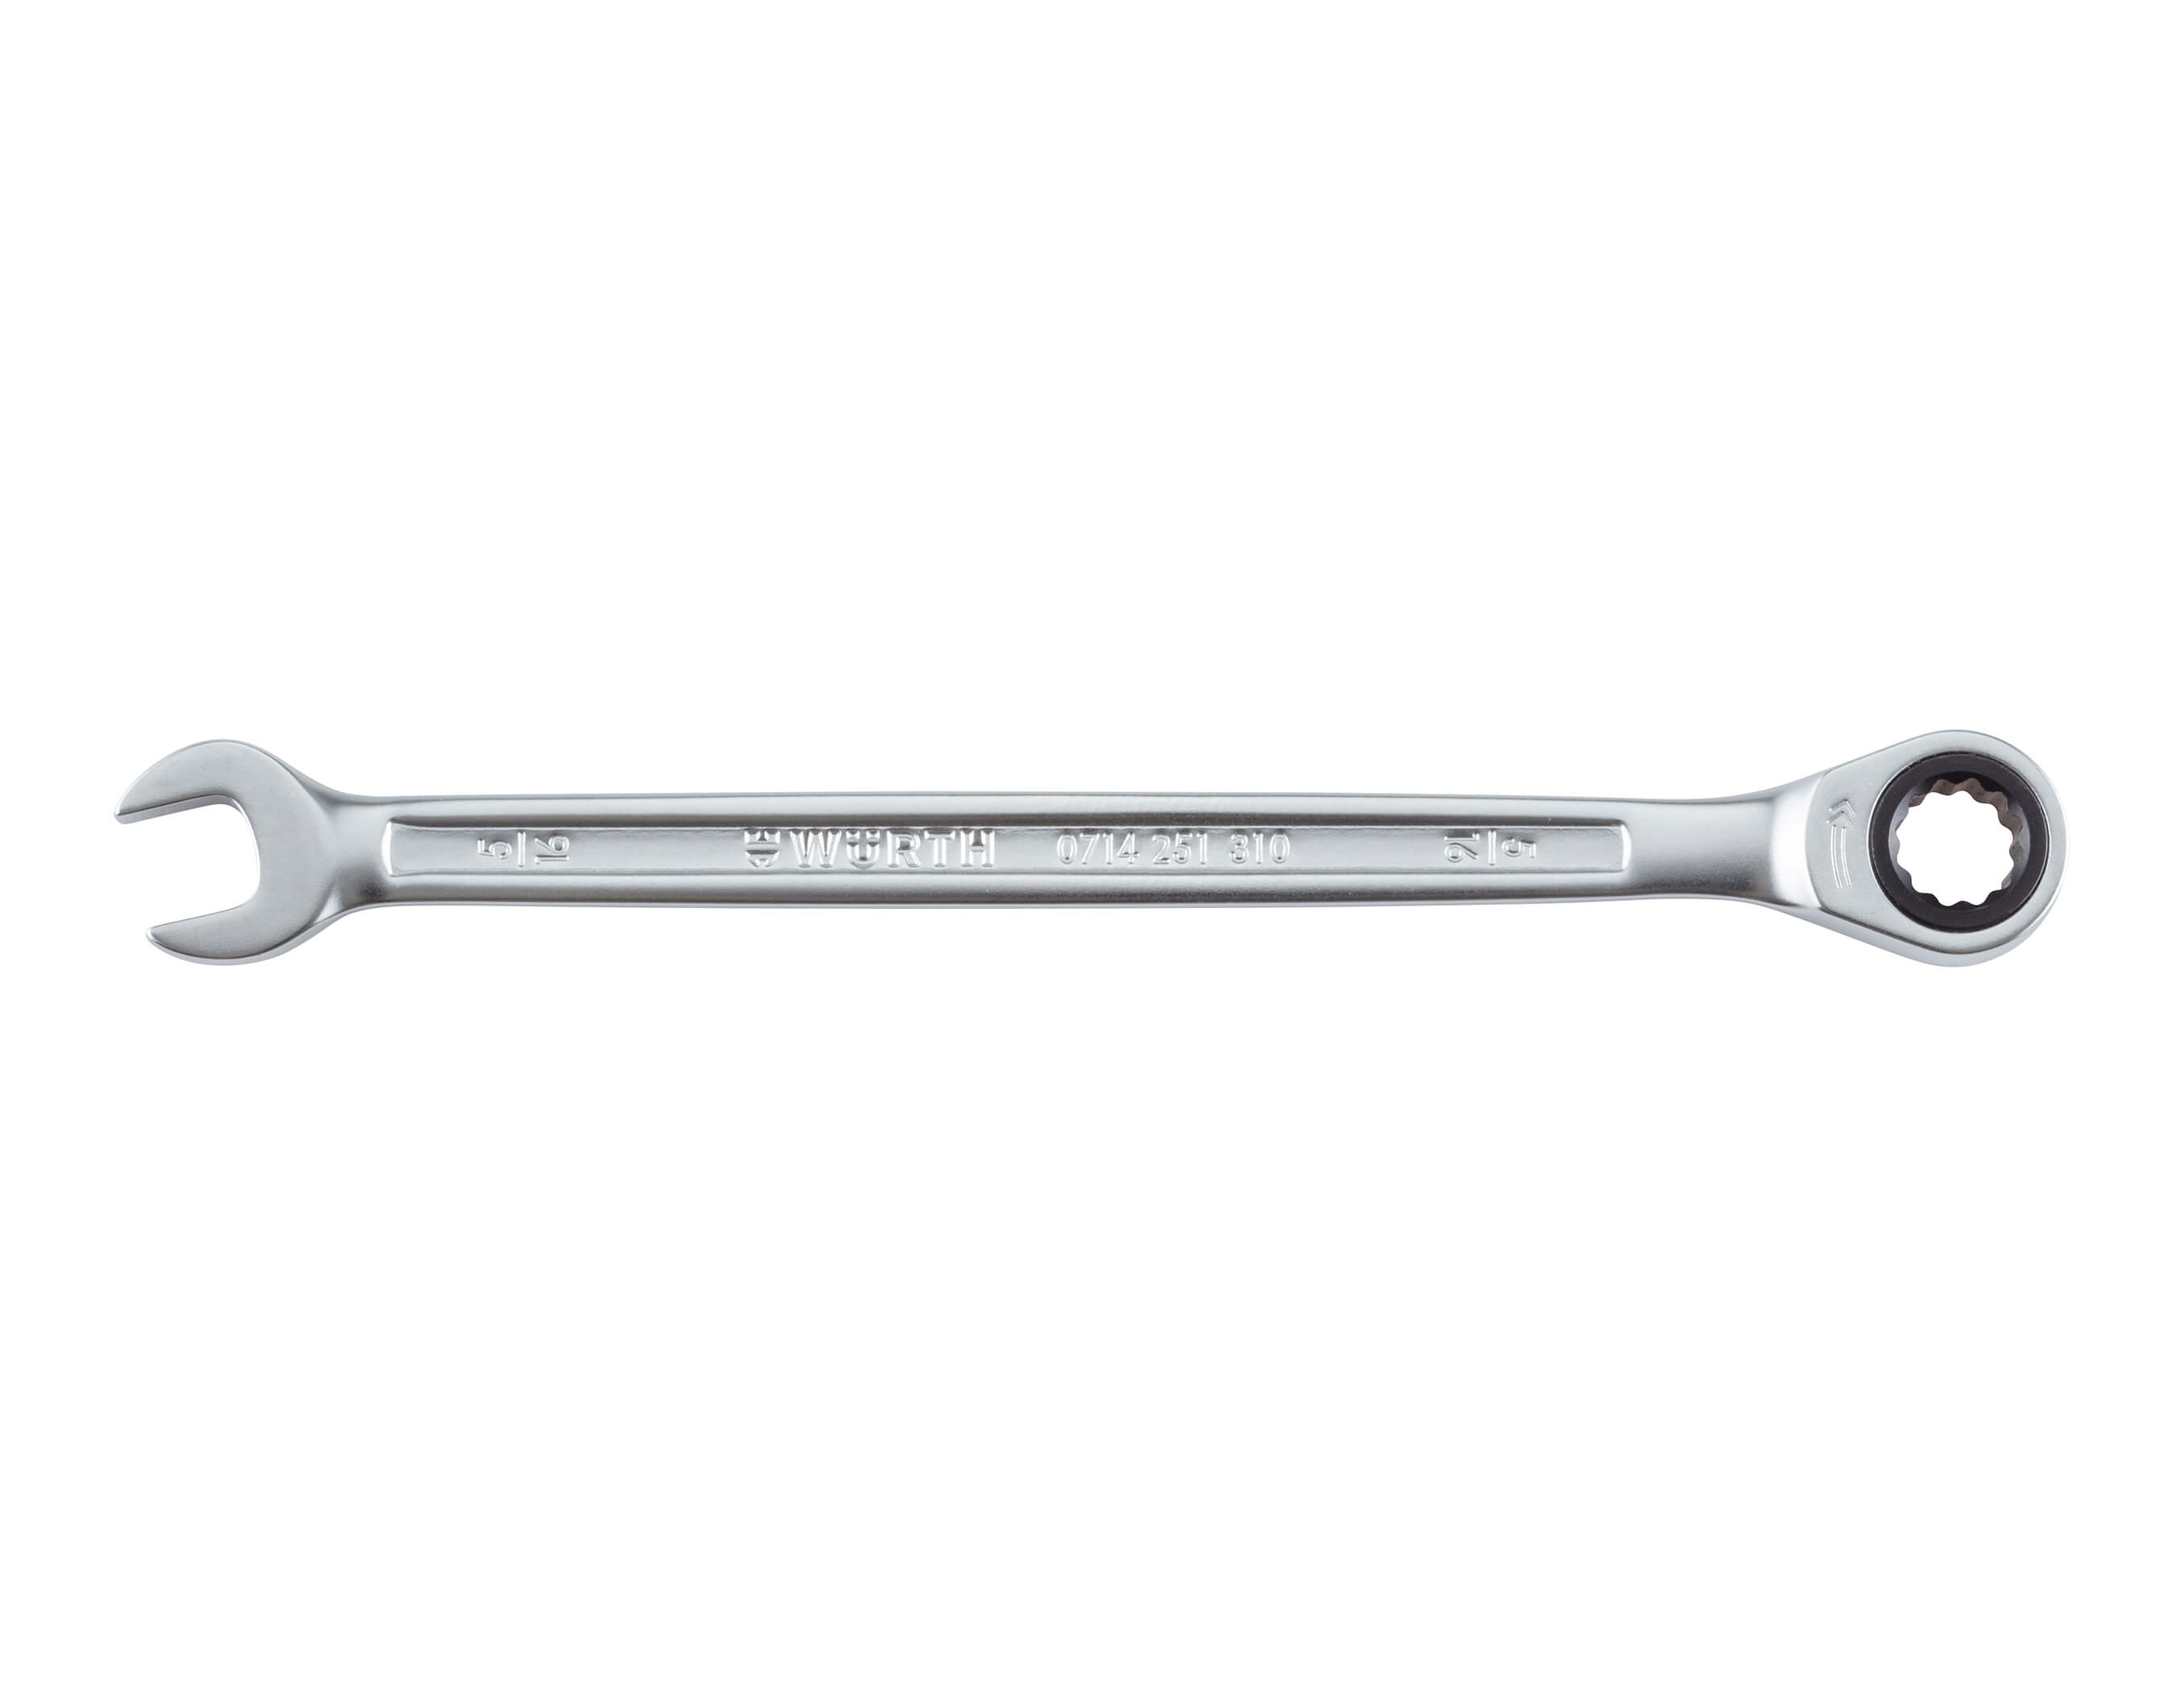 Ratcheting Combination Wrench 5/8 "